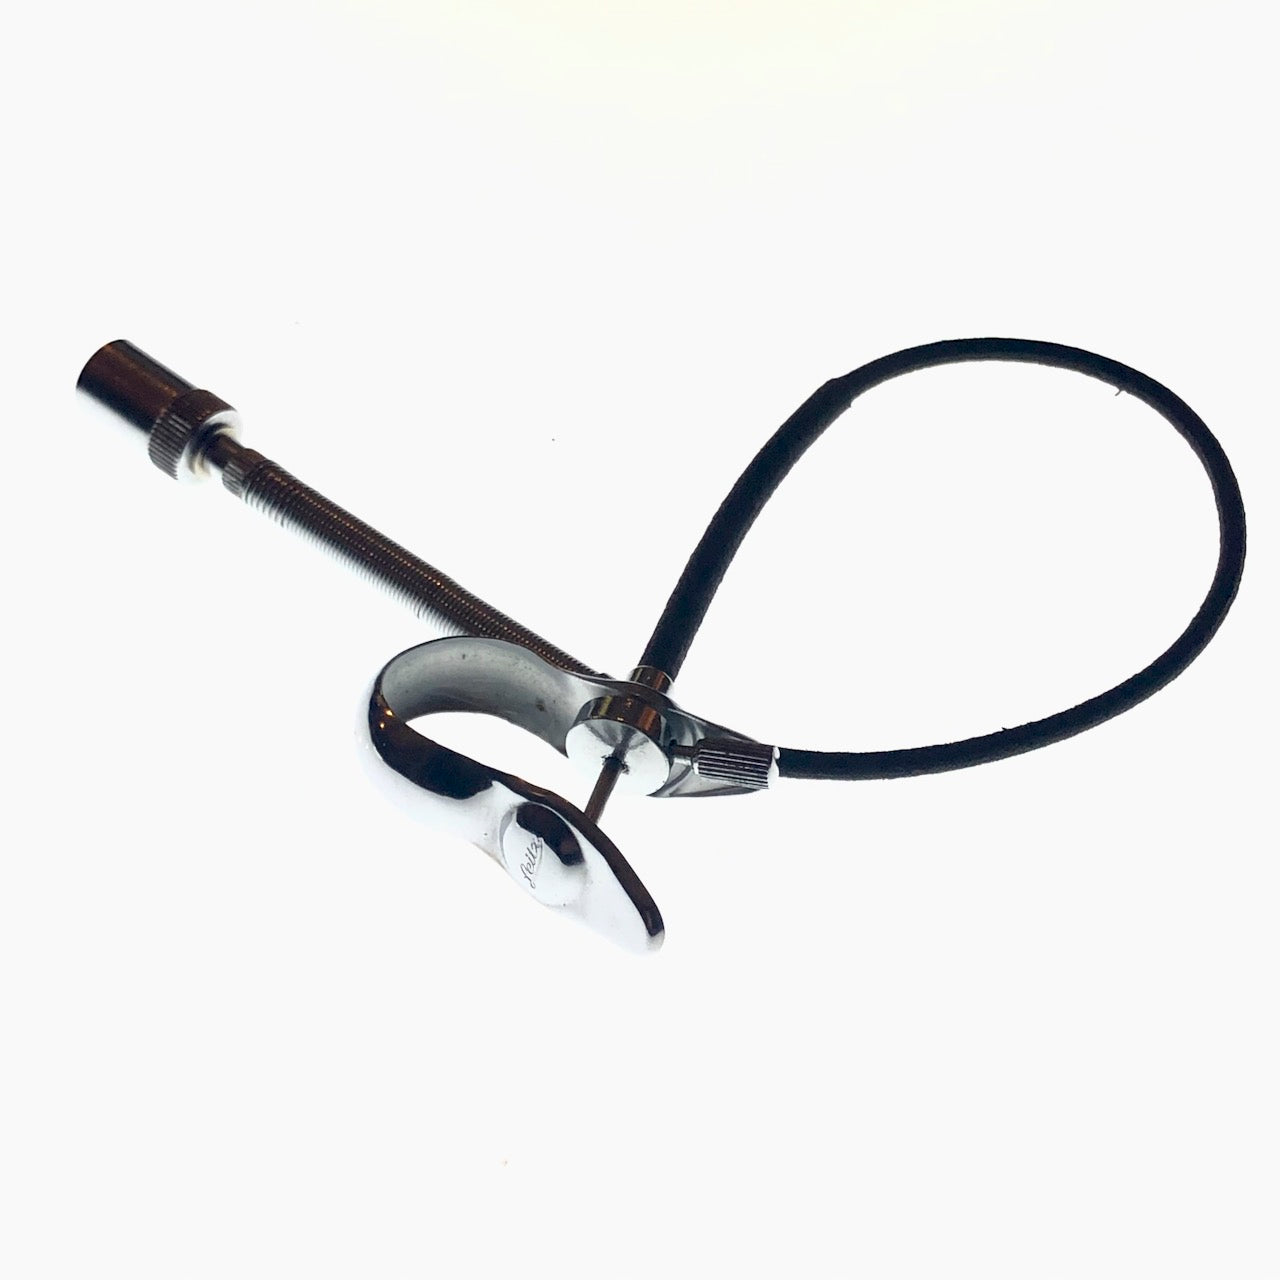 Leitz MQUOO cable release